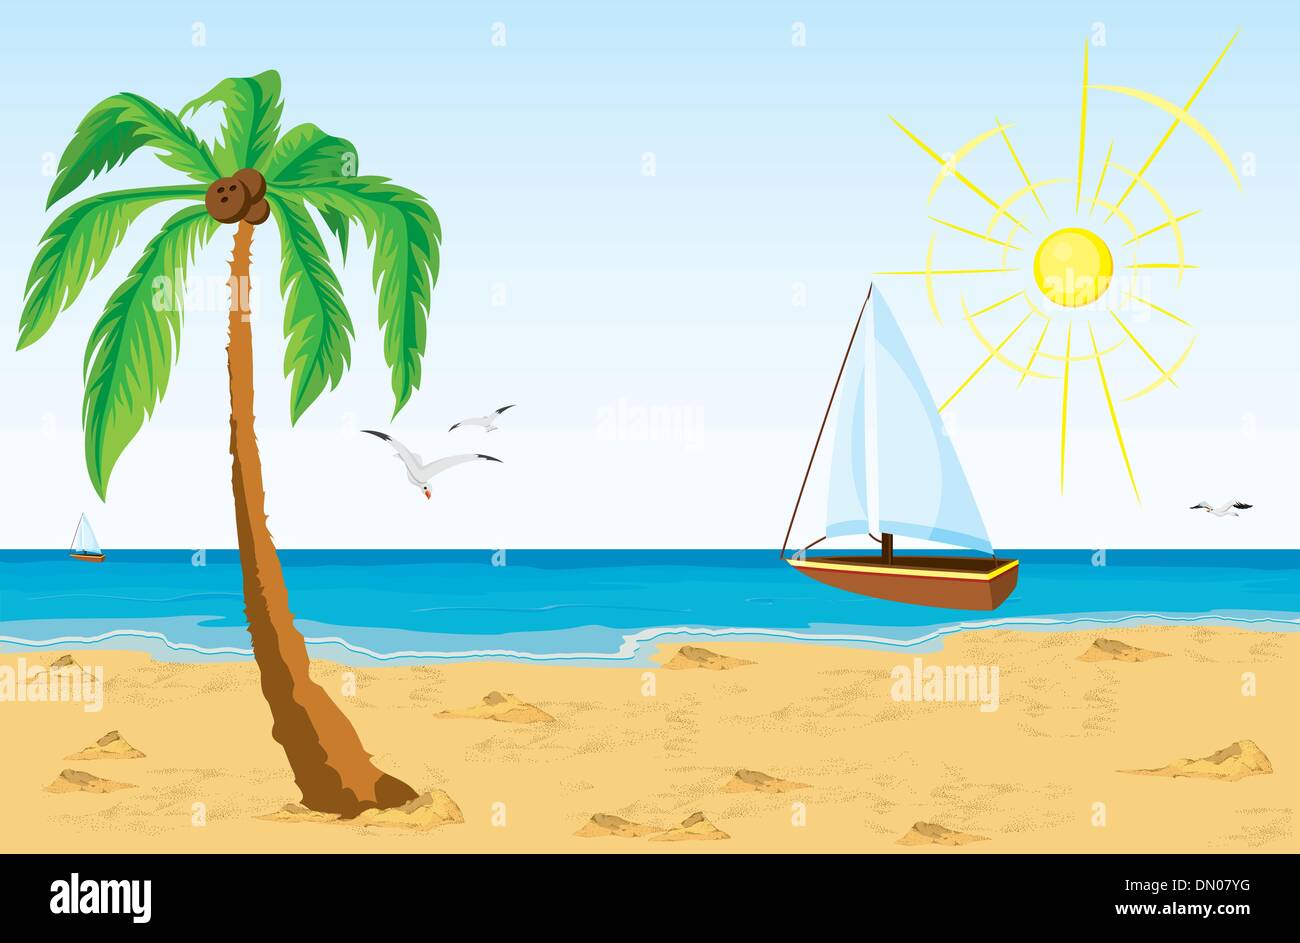 Palm tree on sand beach and bat sailing in the ocean Stock Vector